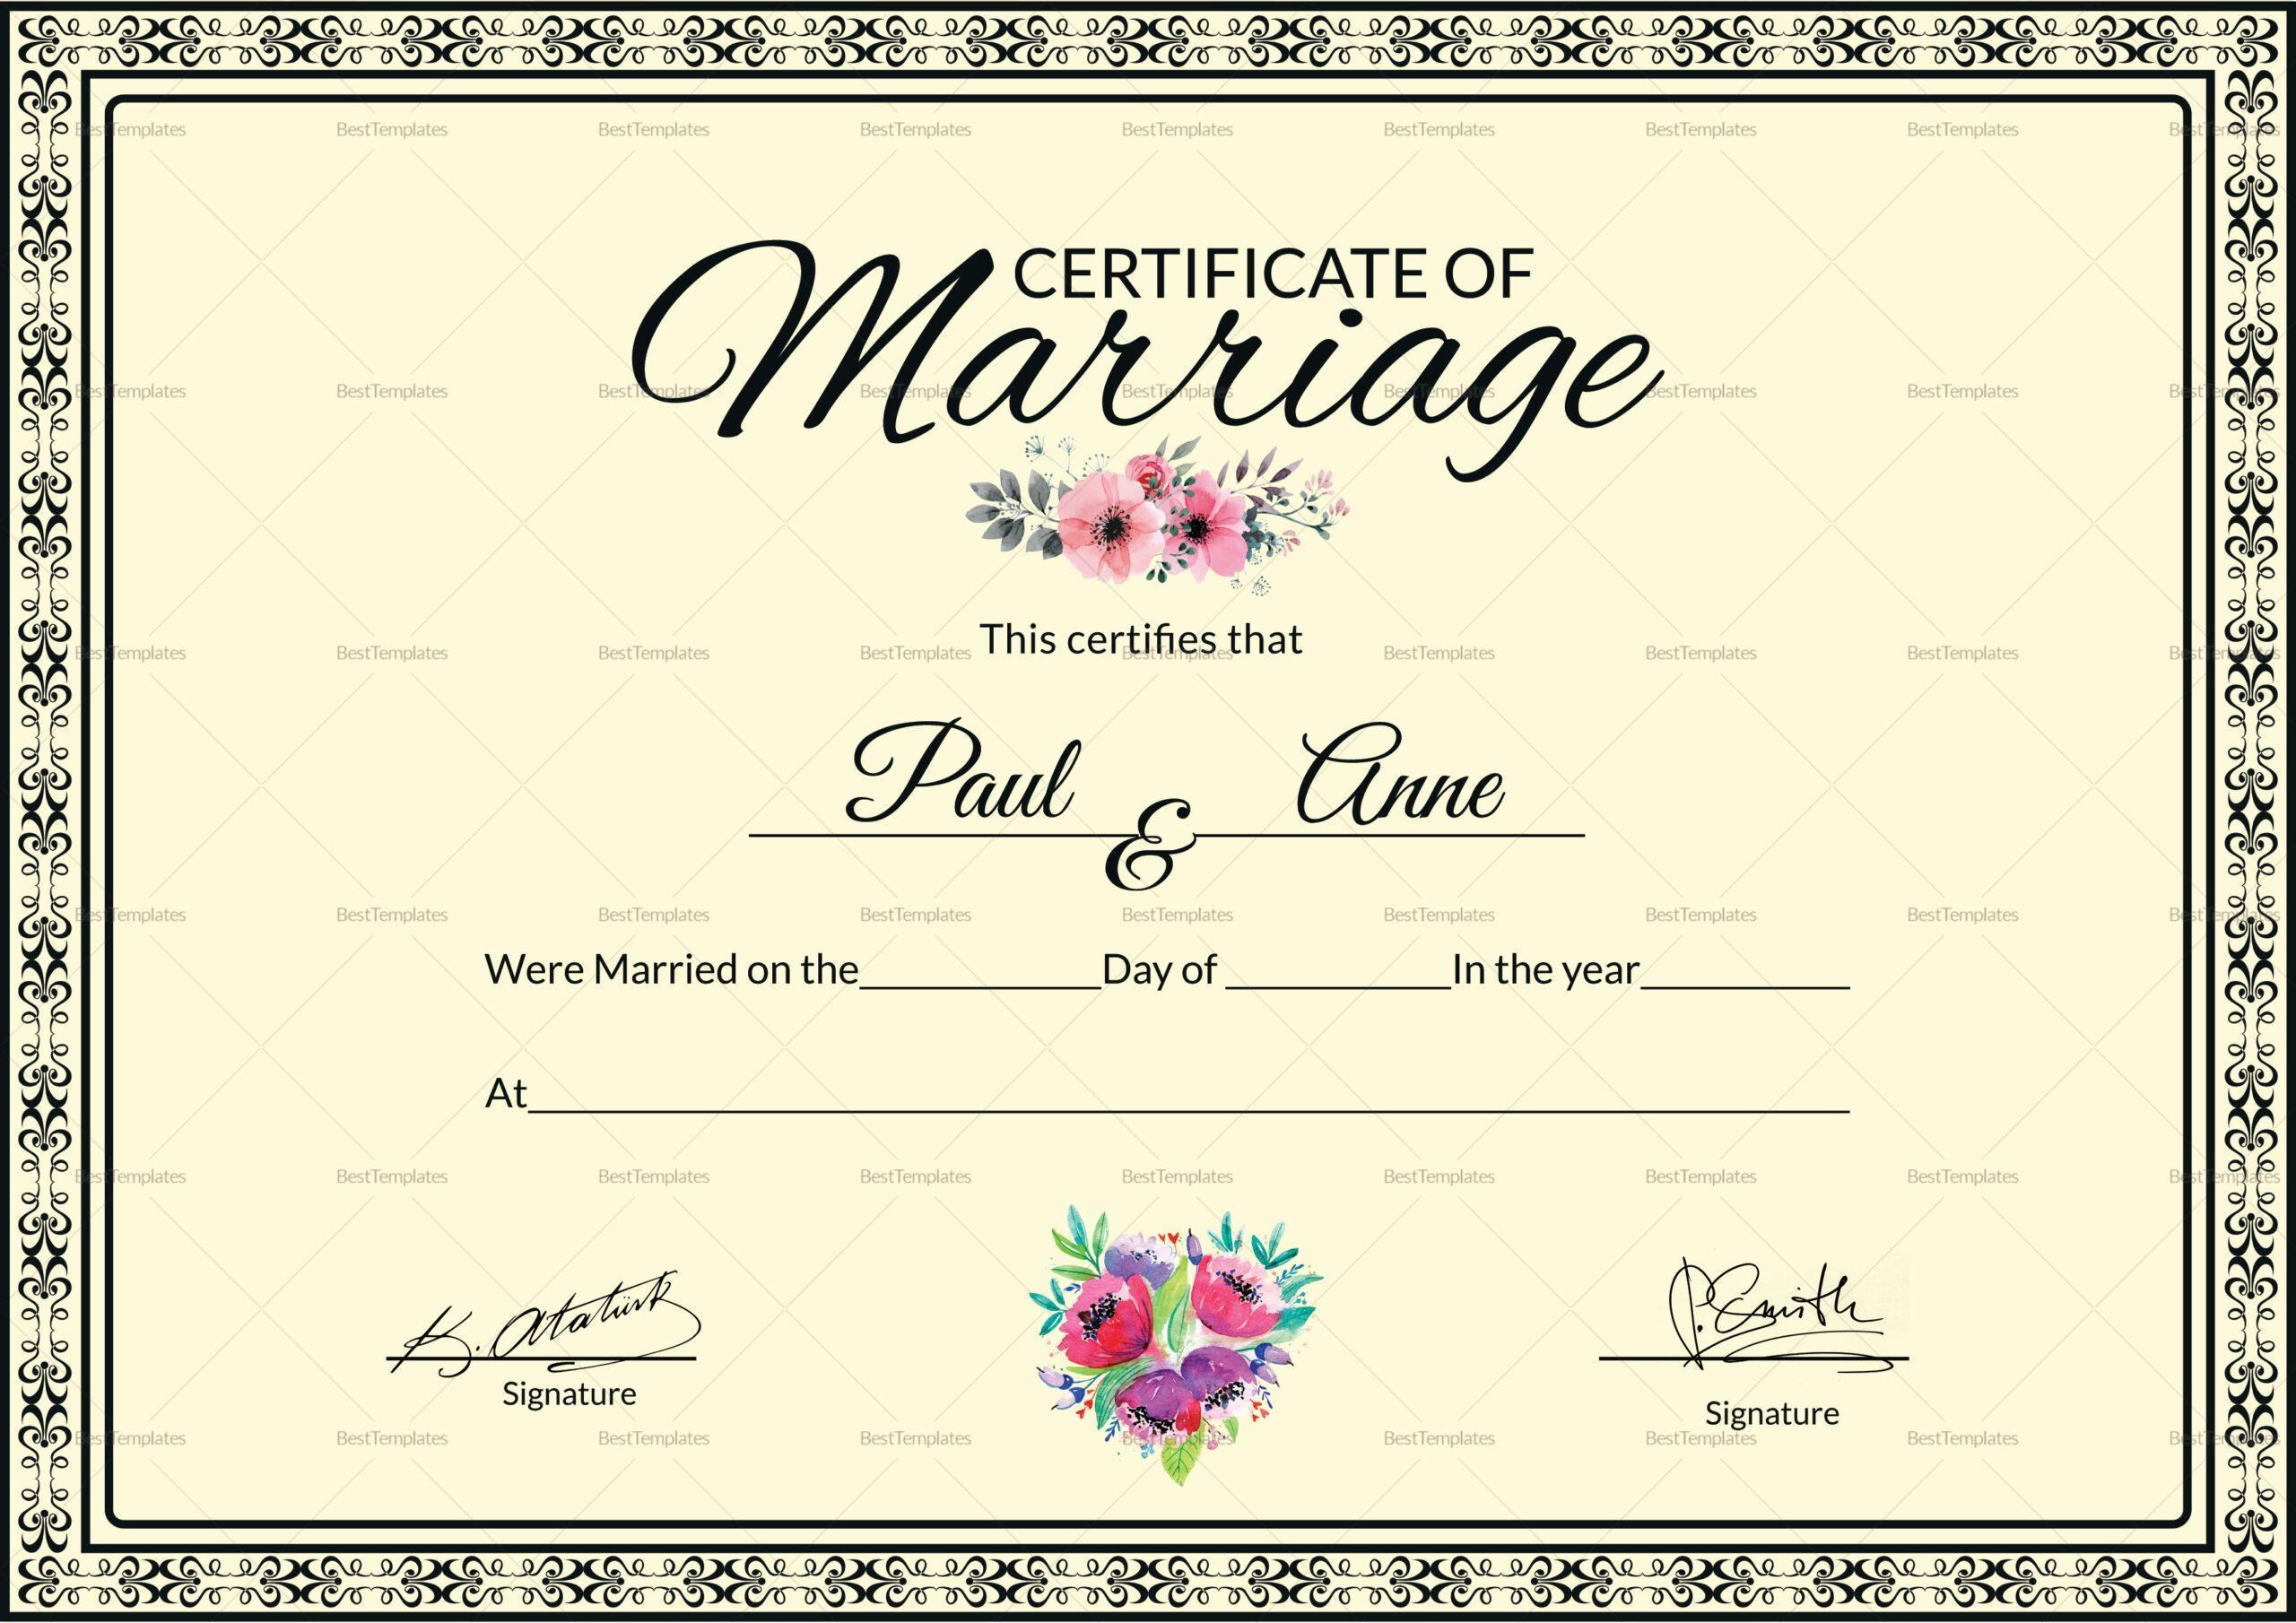 Certificate-of-Marriage-Template-Free-Download